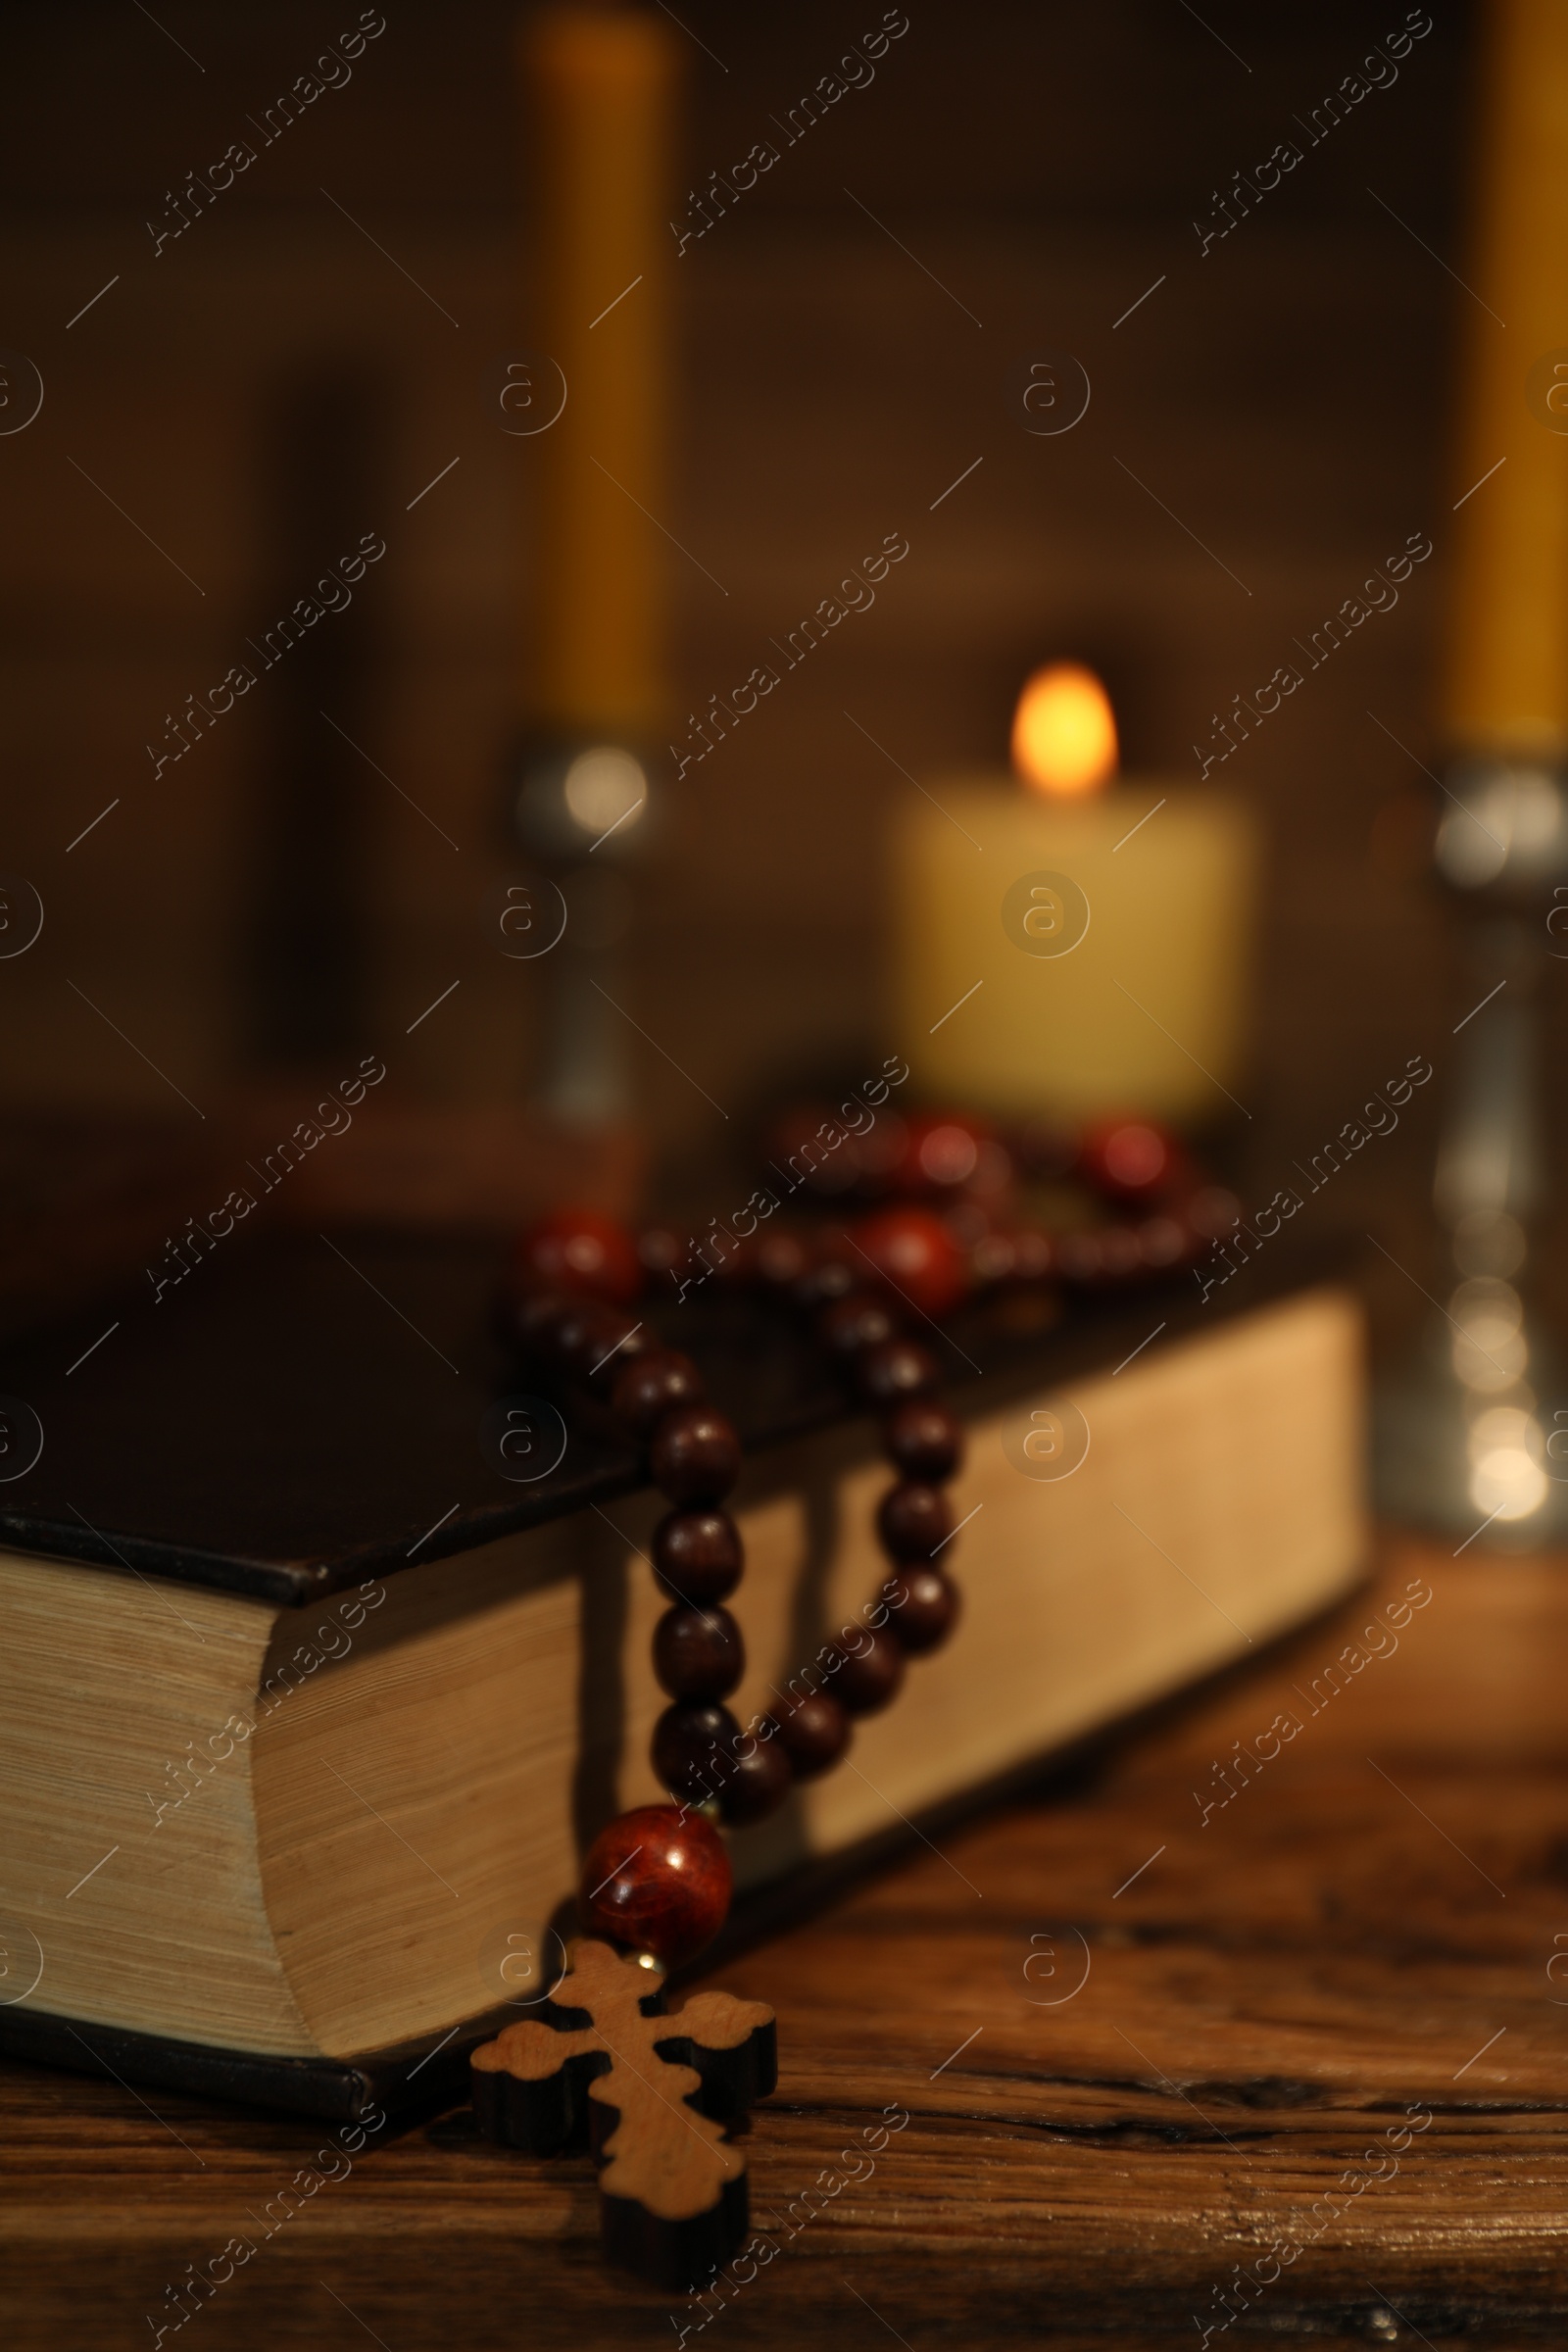 Photo of Cross, Bible, rosary beads and church candles on wooden table, closeup